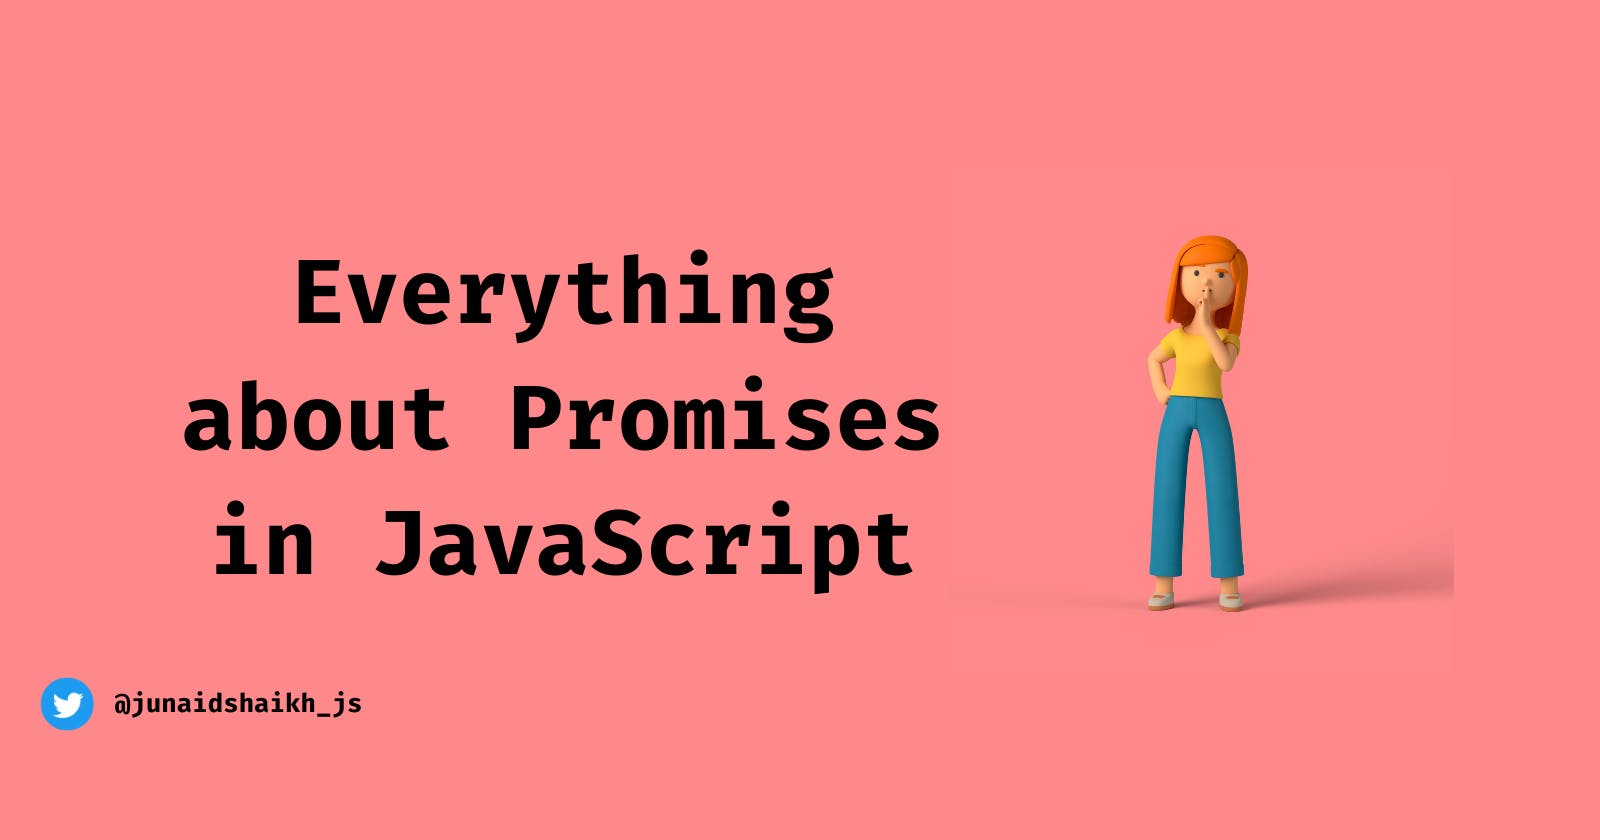 Everything about promises in JavaScript